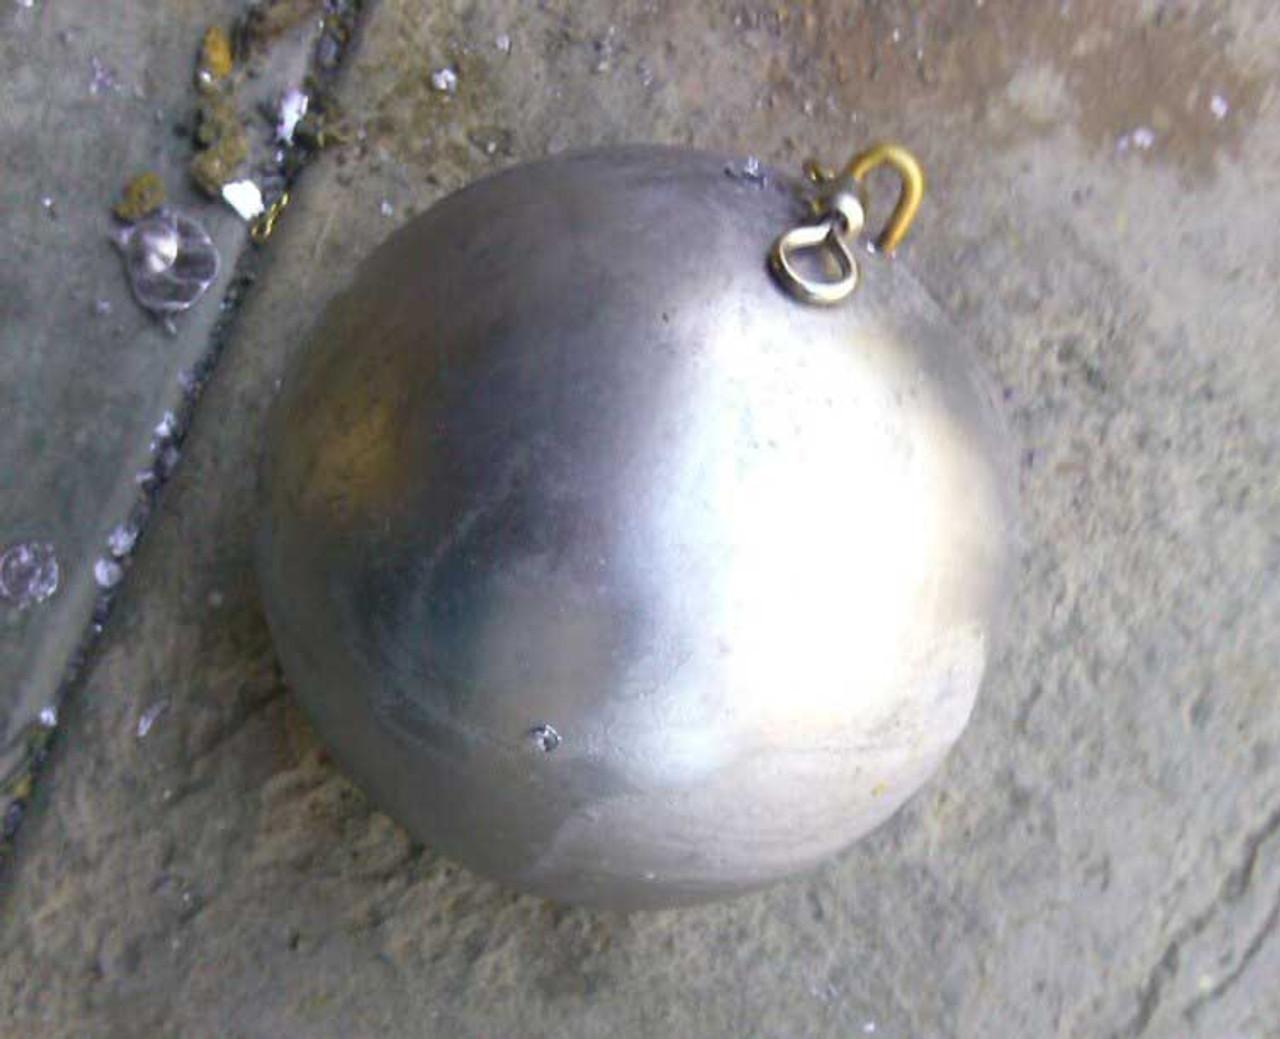 45 lb lead cannonball fishing weight